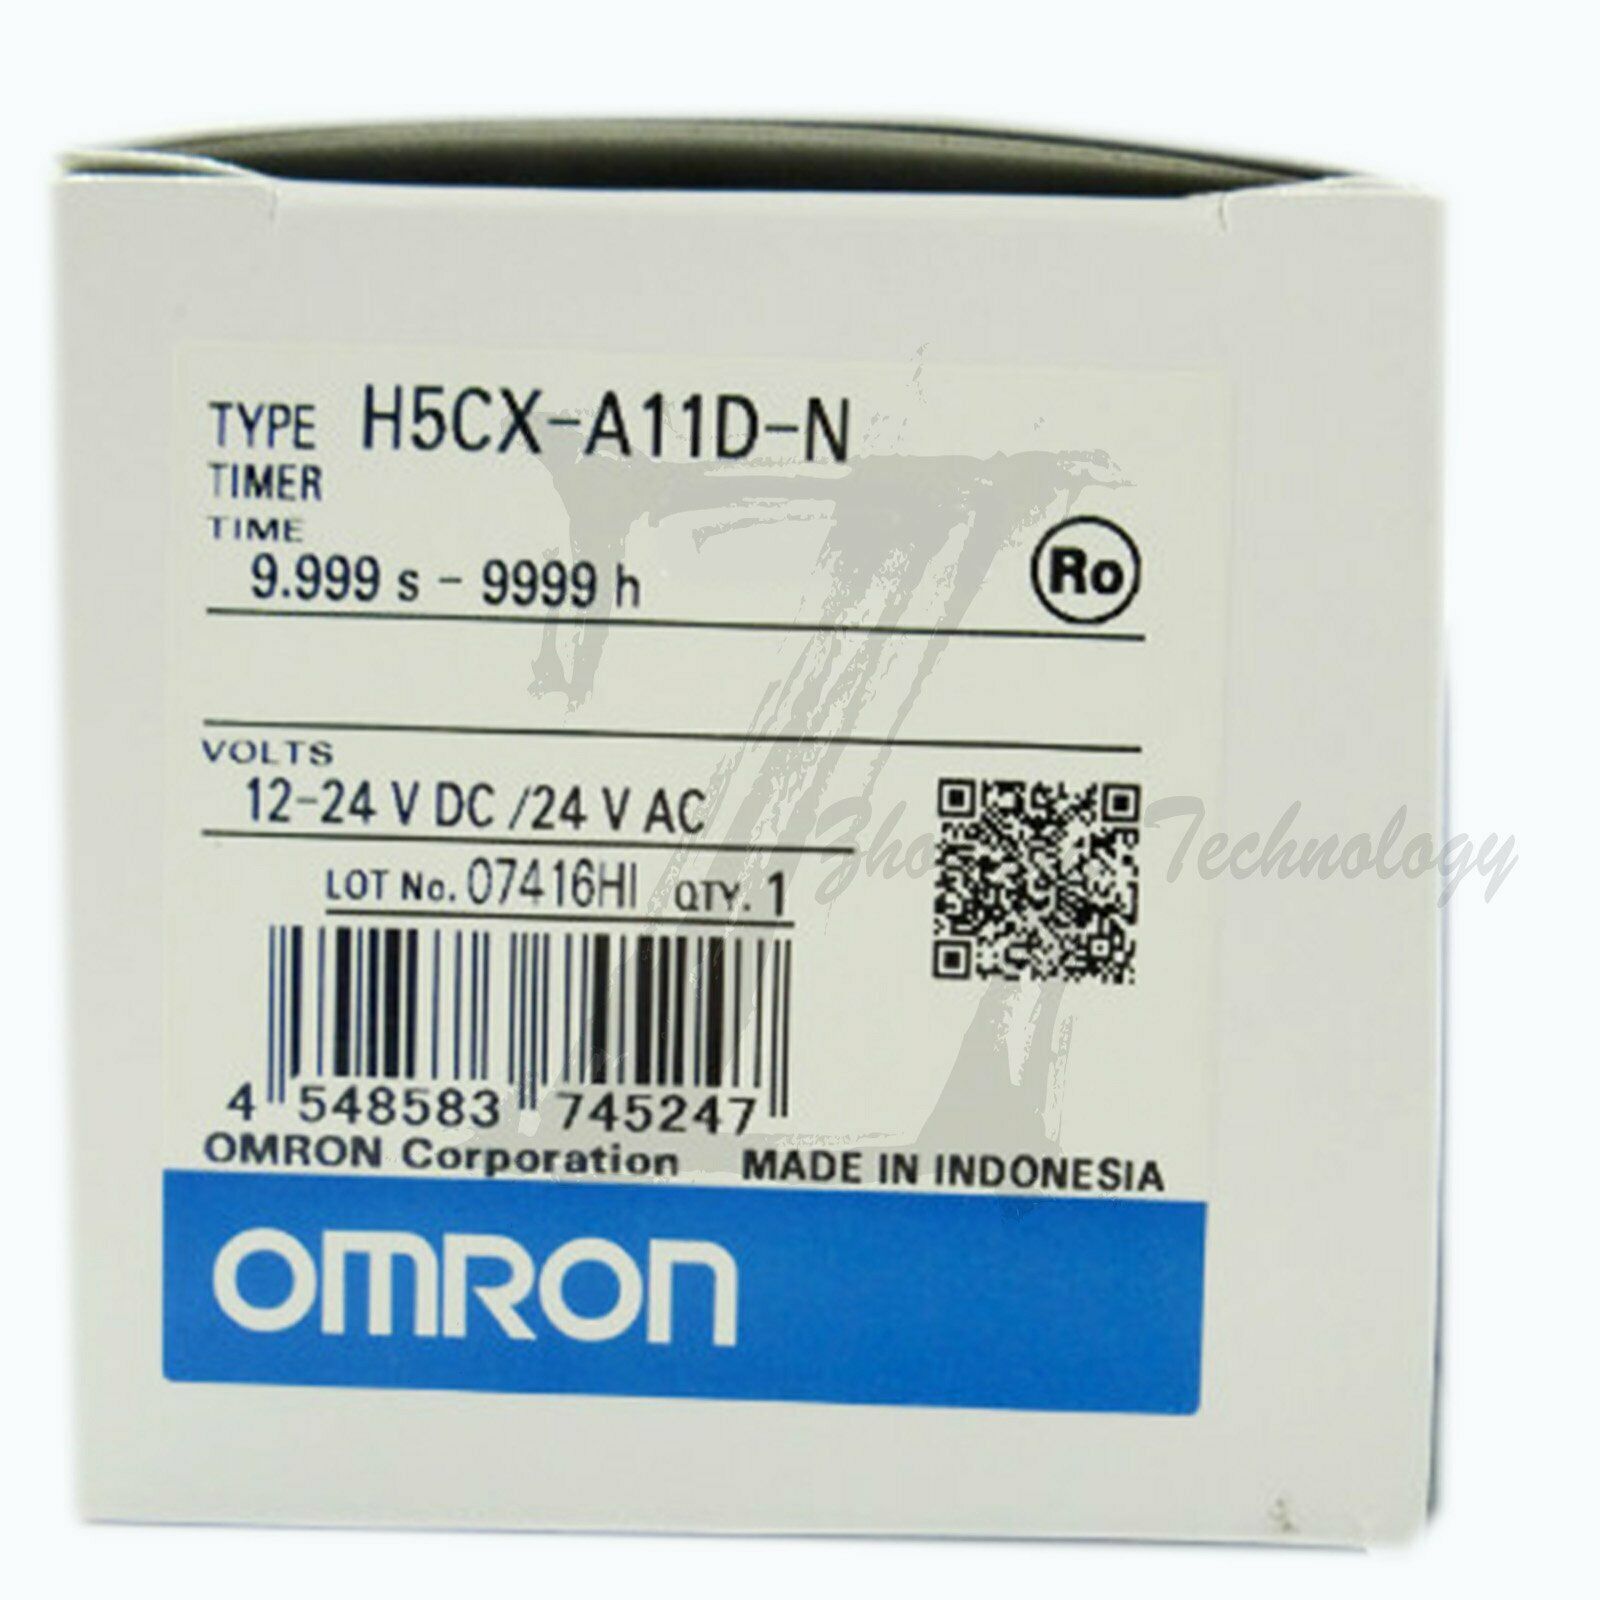 1pc new Omron time relay H5CX-A11D-N one year warranty KOEED 201-500, 90%, import_2020_10_10_031751, Omron, Other